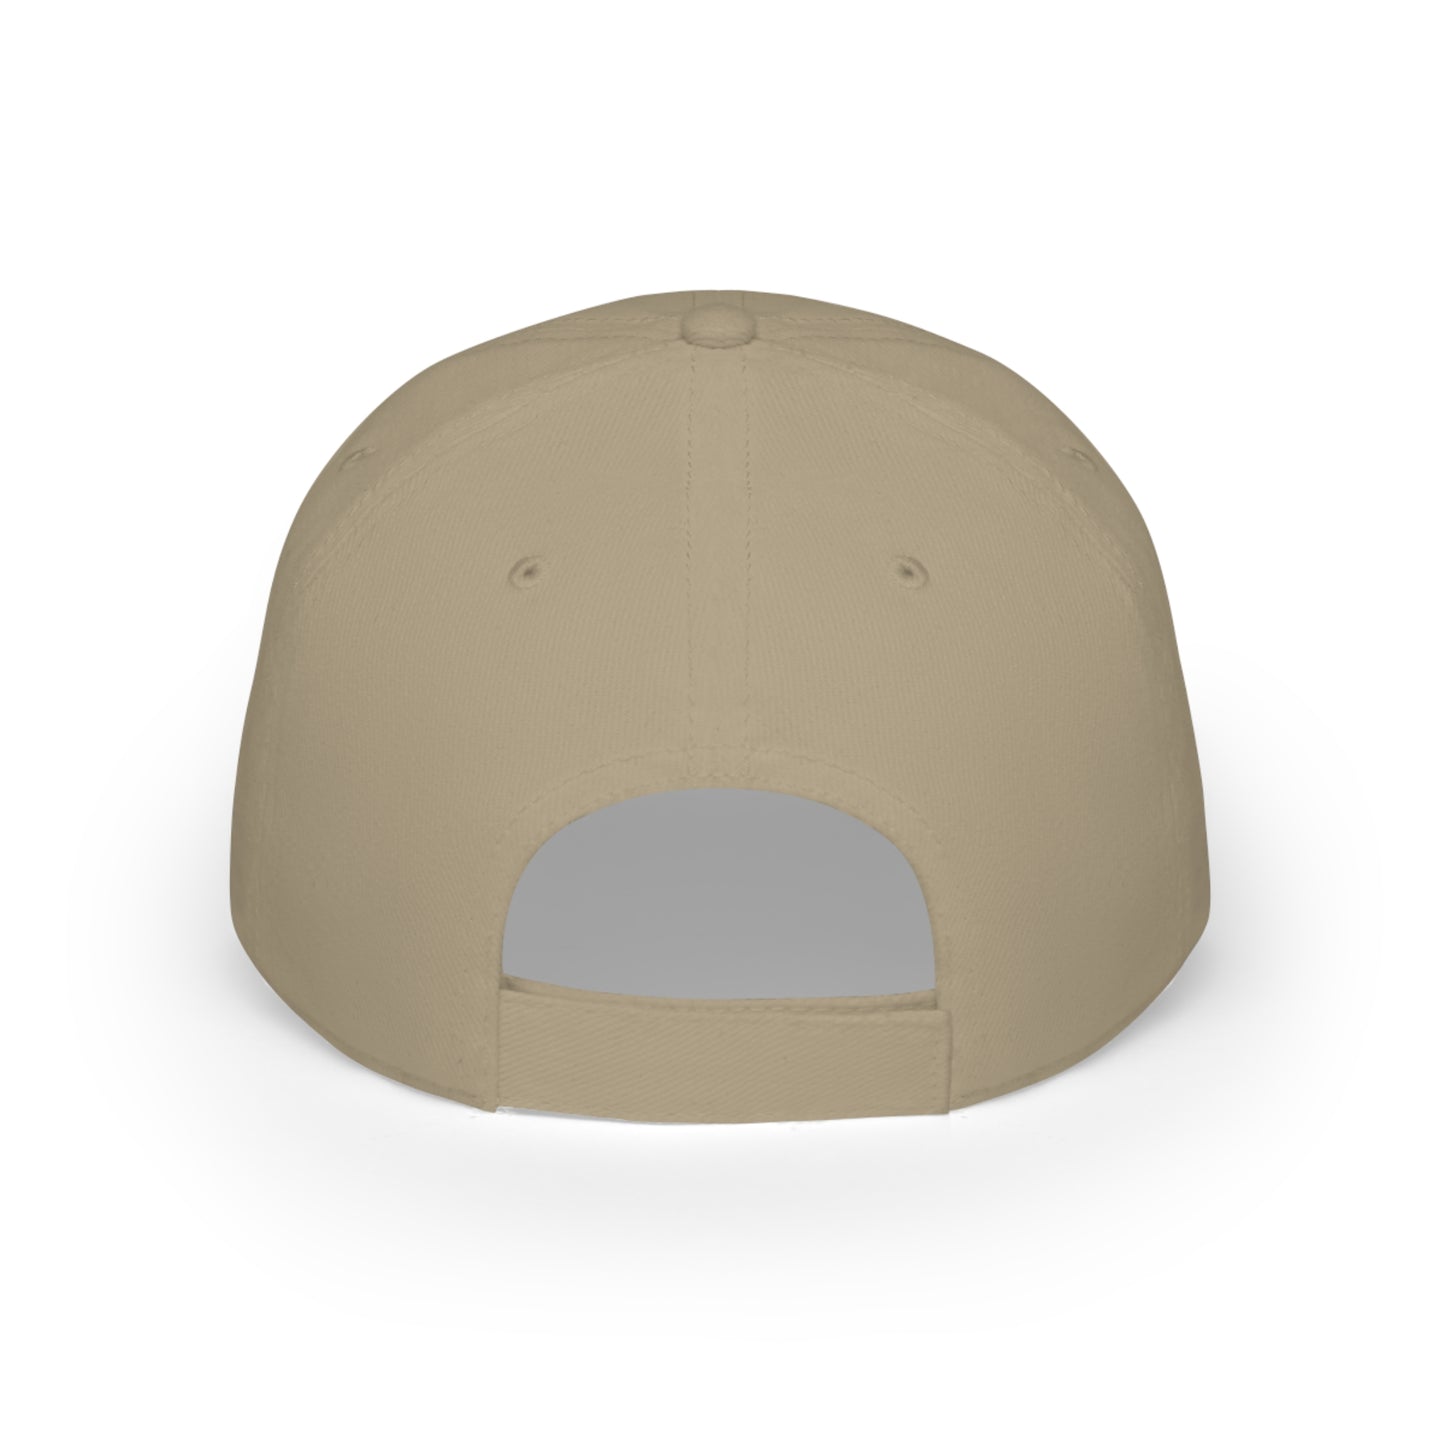 As For Me and My House We Will Serve the Lord / Low Profile Baseball Cap